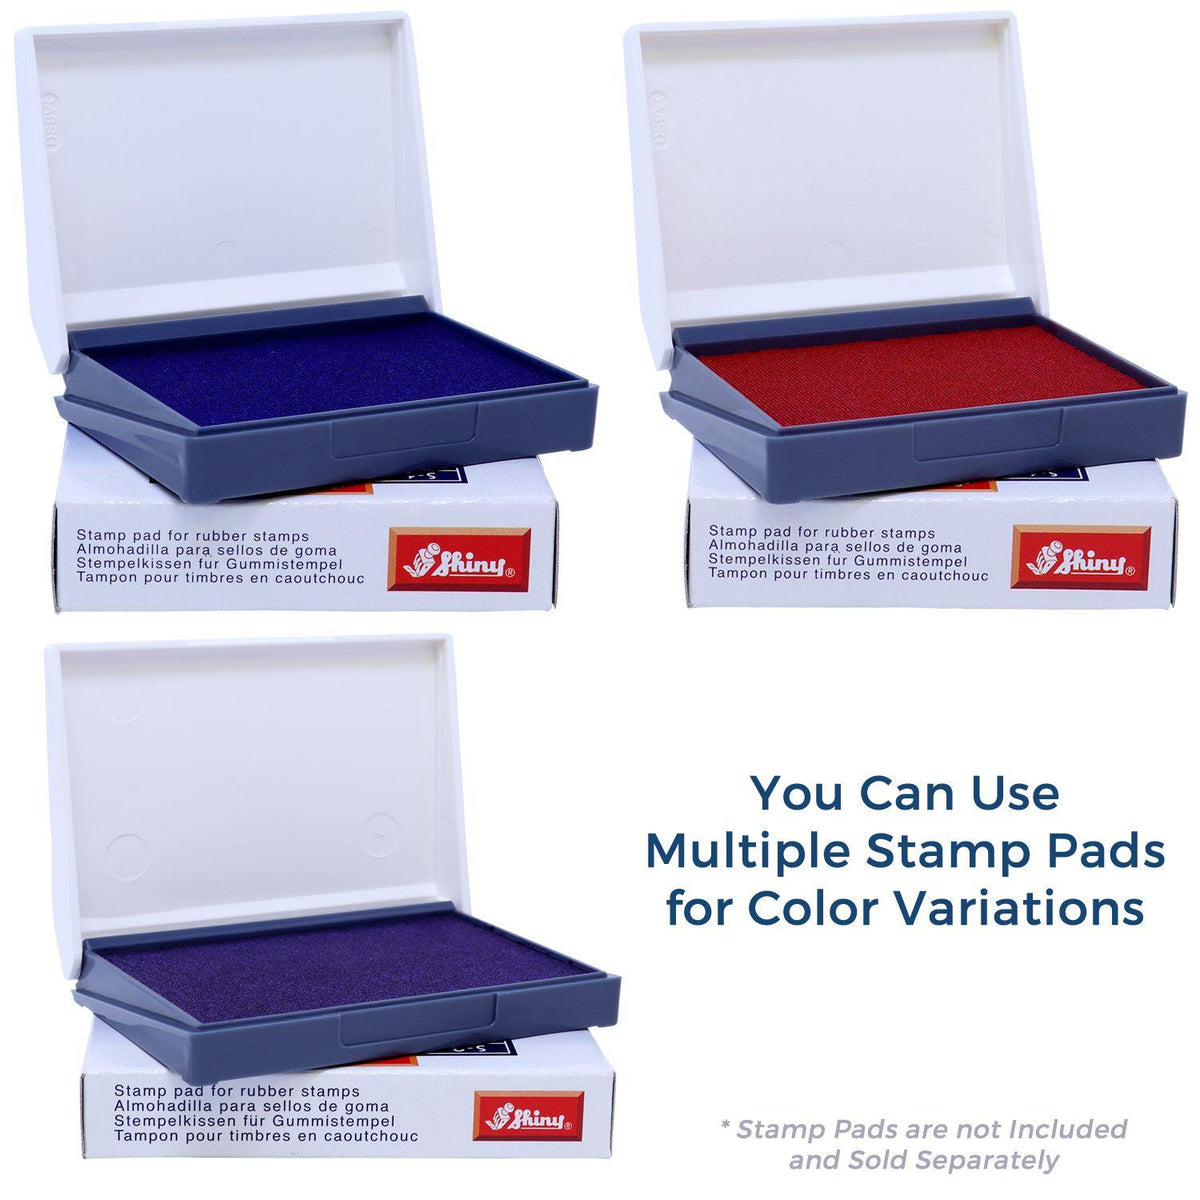 Stamp Pads for Large Capitation Rubber Stamp Available